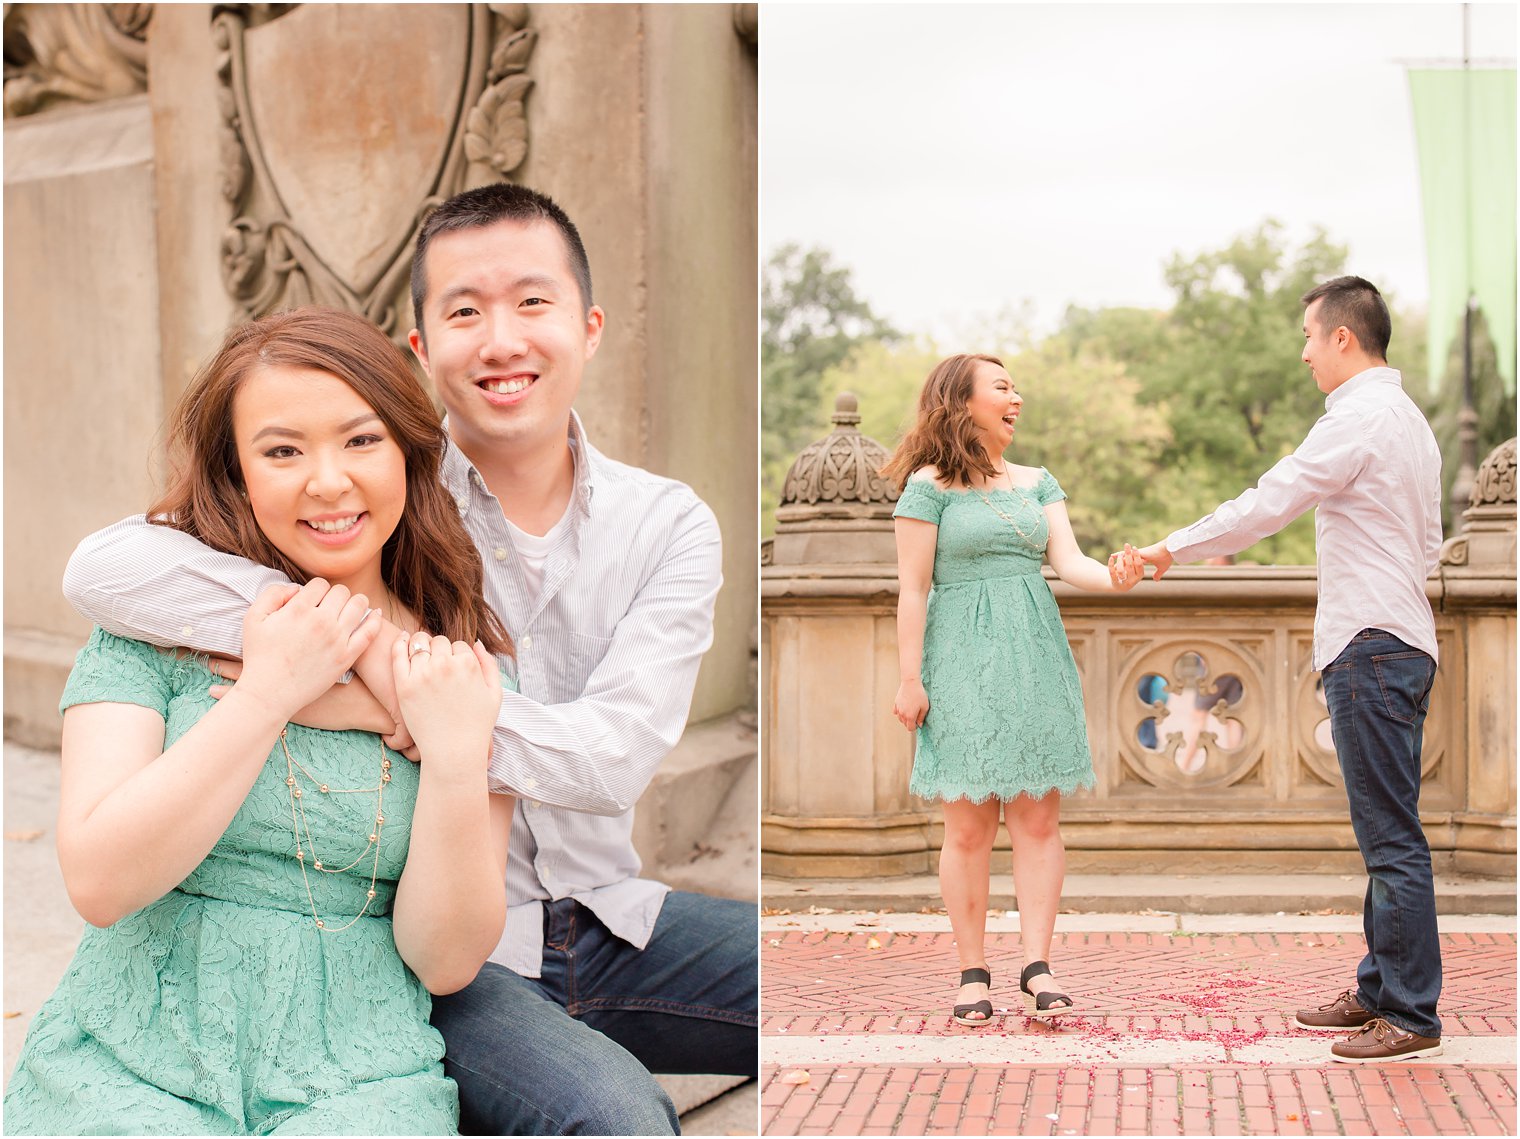 Engagement photography in Central Park by Idalia Photography